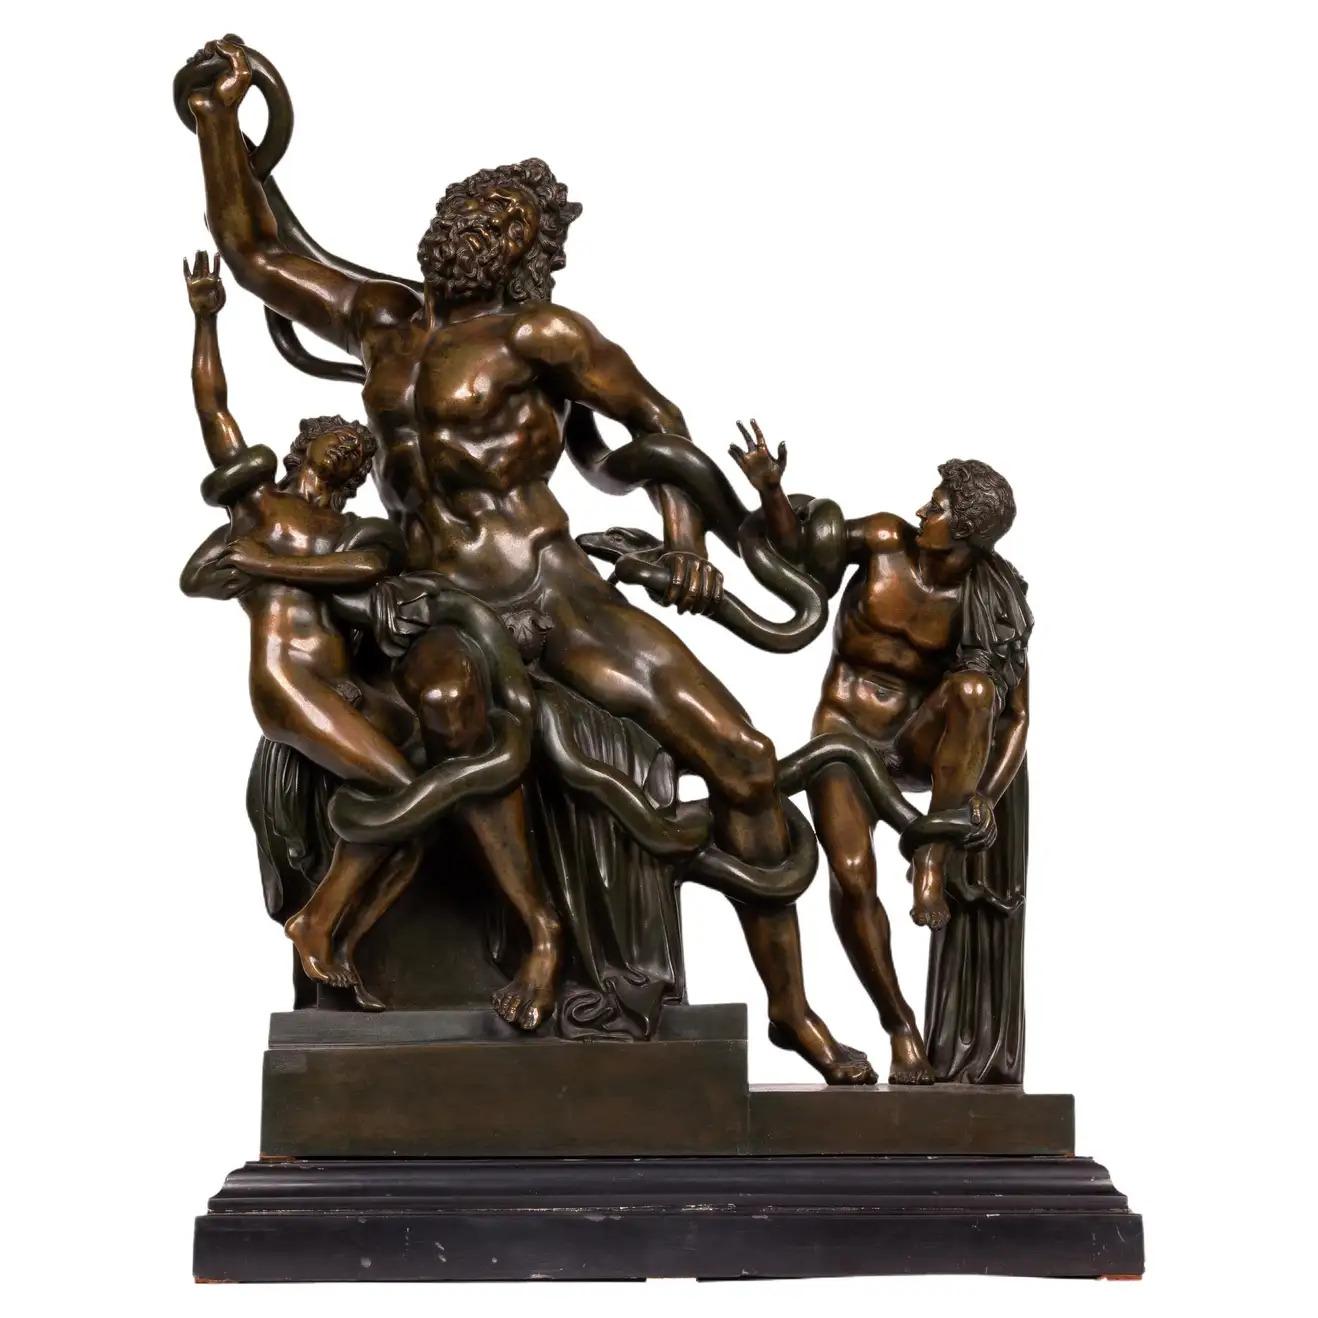 Unknown Figurative Sculpture - Italian Patinated Bronze Group Sculpture of Laocoon and His Sons, C. 1870